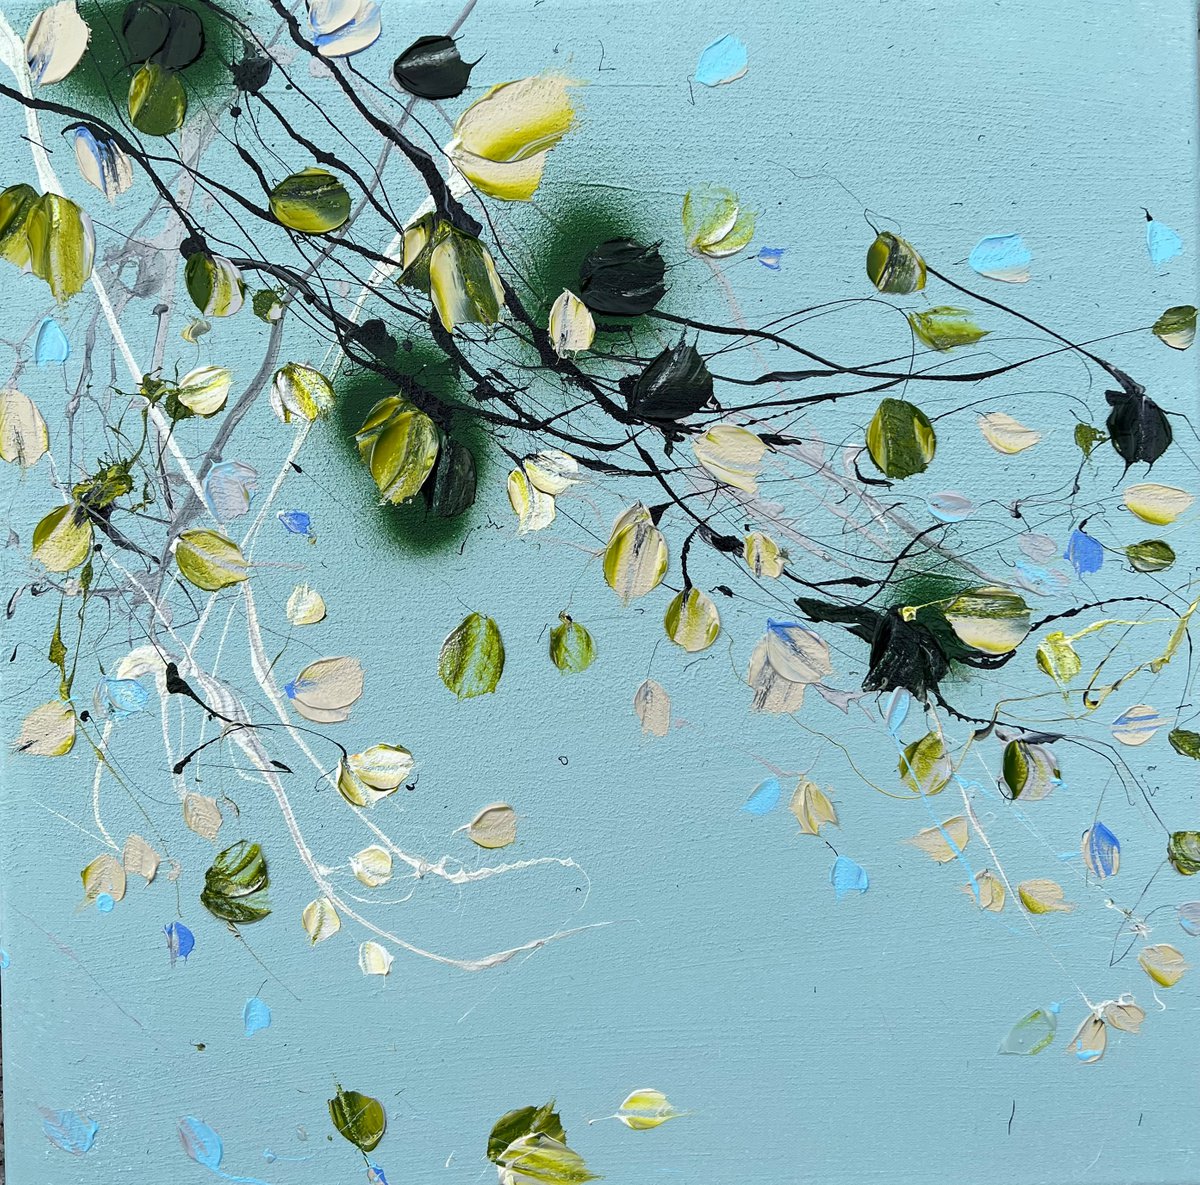 Structure impasto acrylic painting with abstract flowers 50x50cm Small Pistachio by Anastassia Skopp